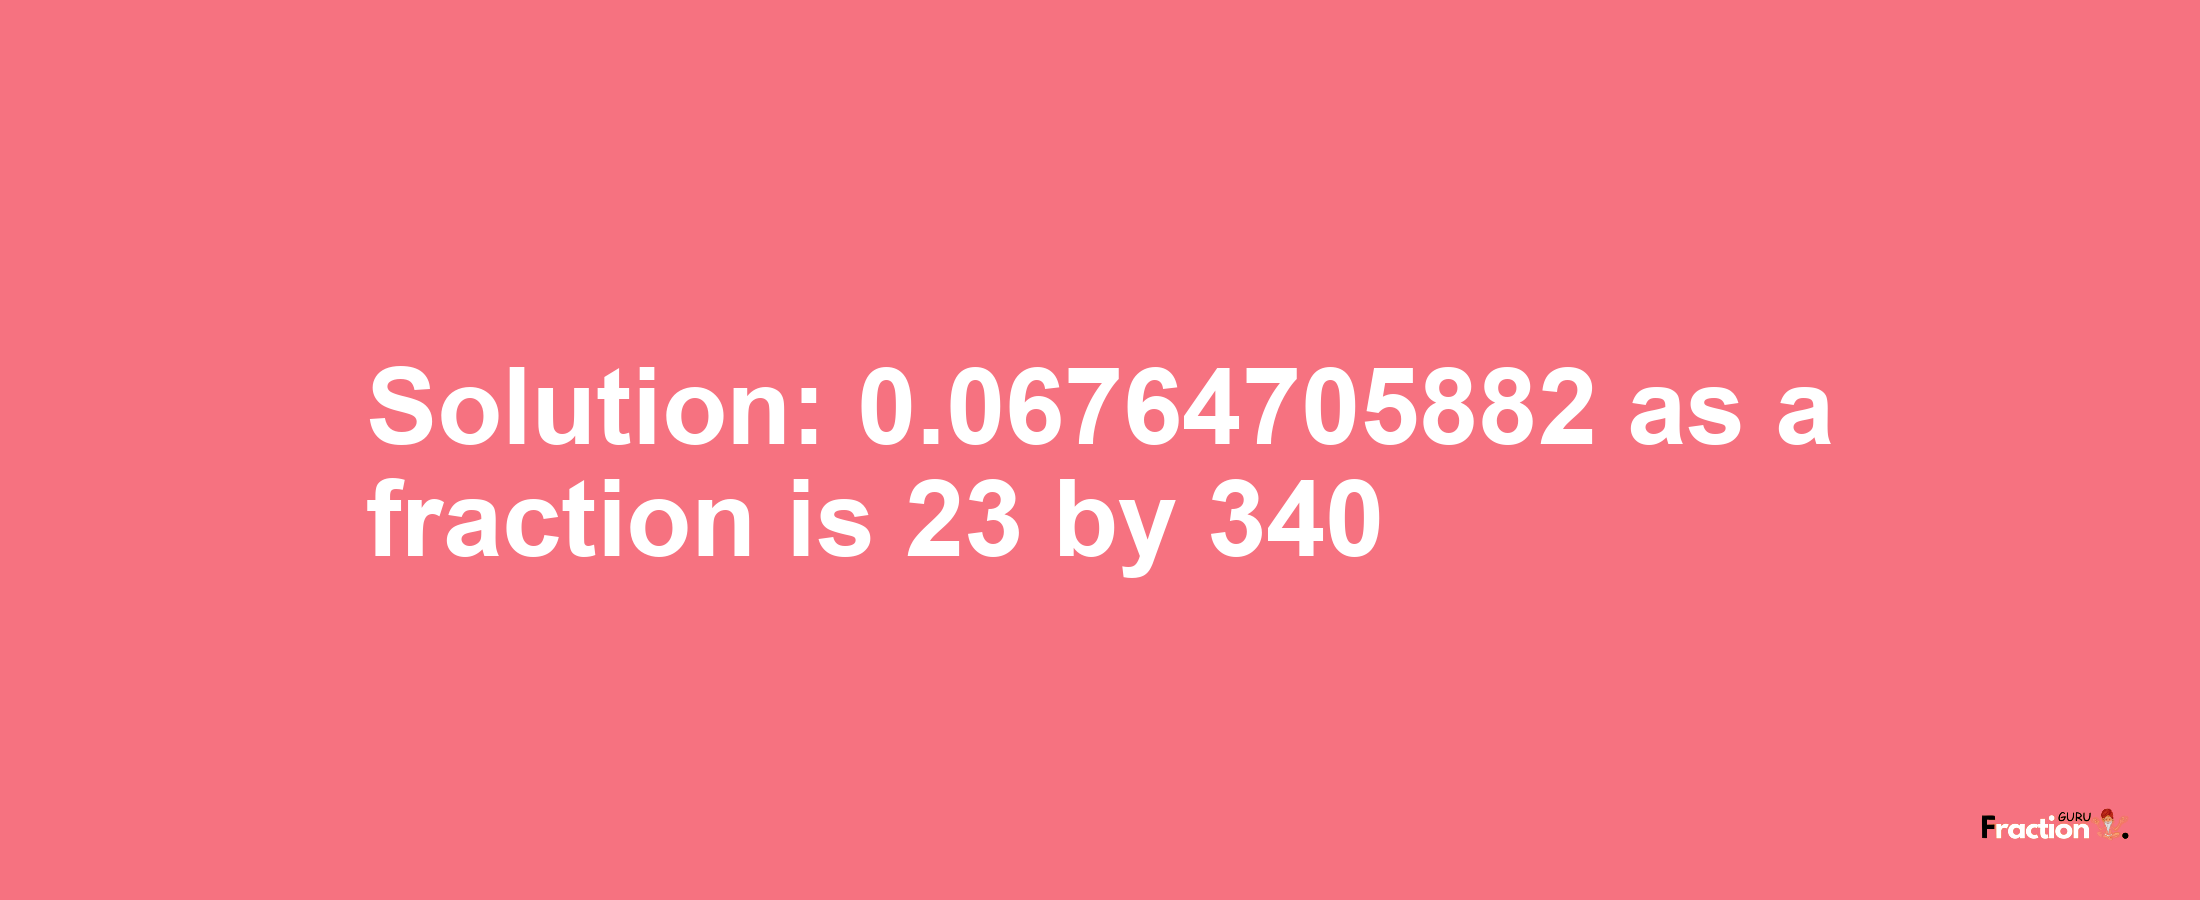 Solution:0.06764705882 as a fraction is 23/340